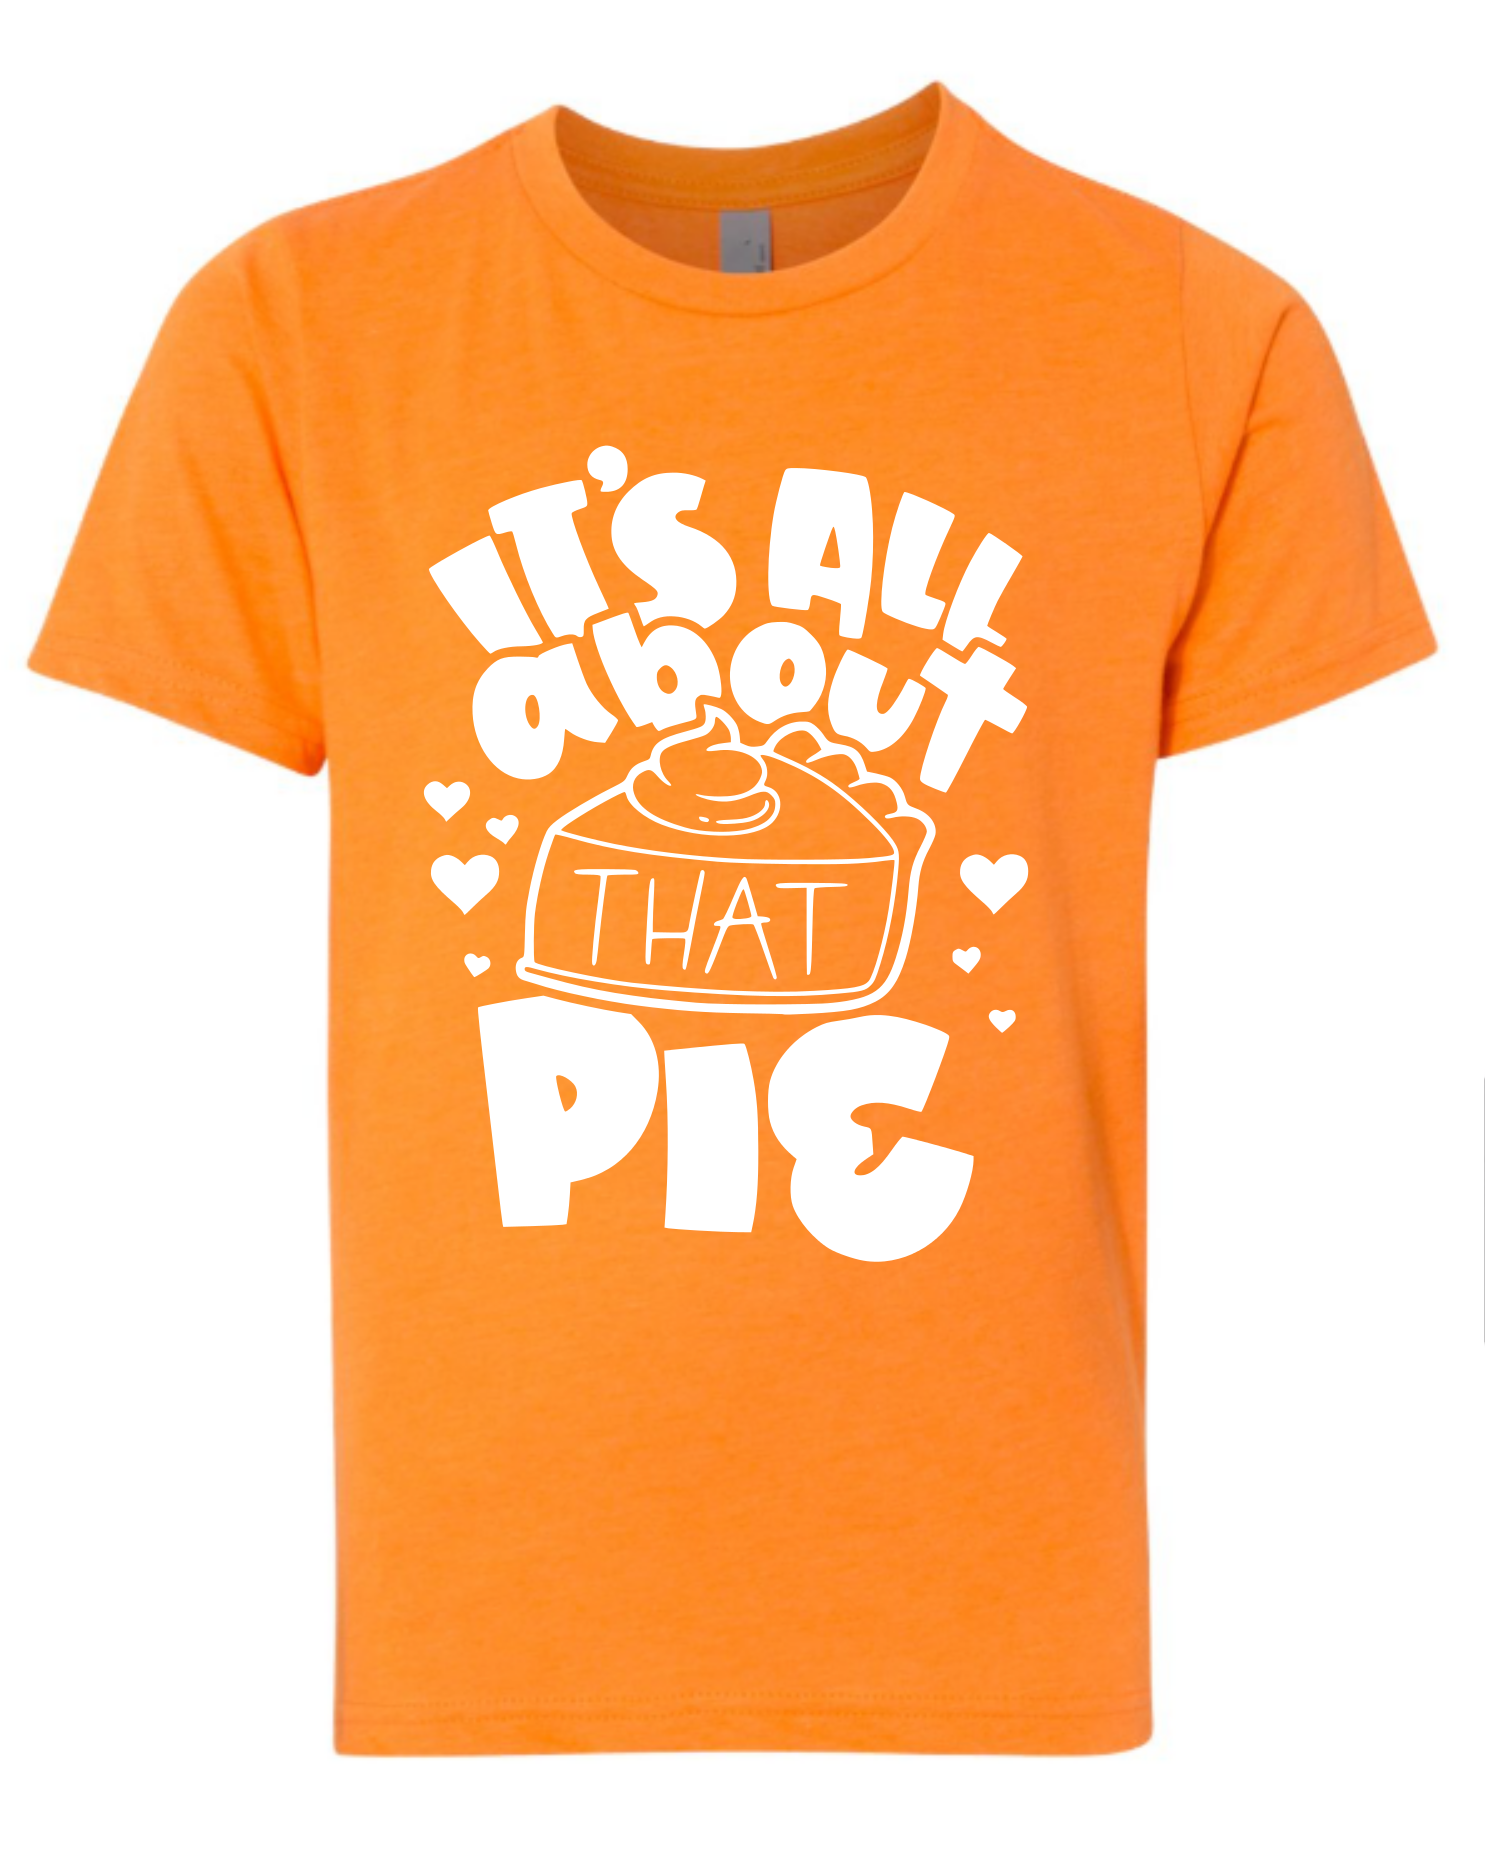 IT'S ALL ABOUT THAT PIE KIDS SHIRT